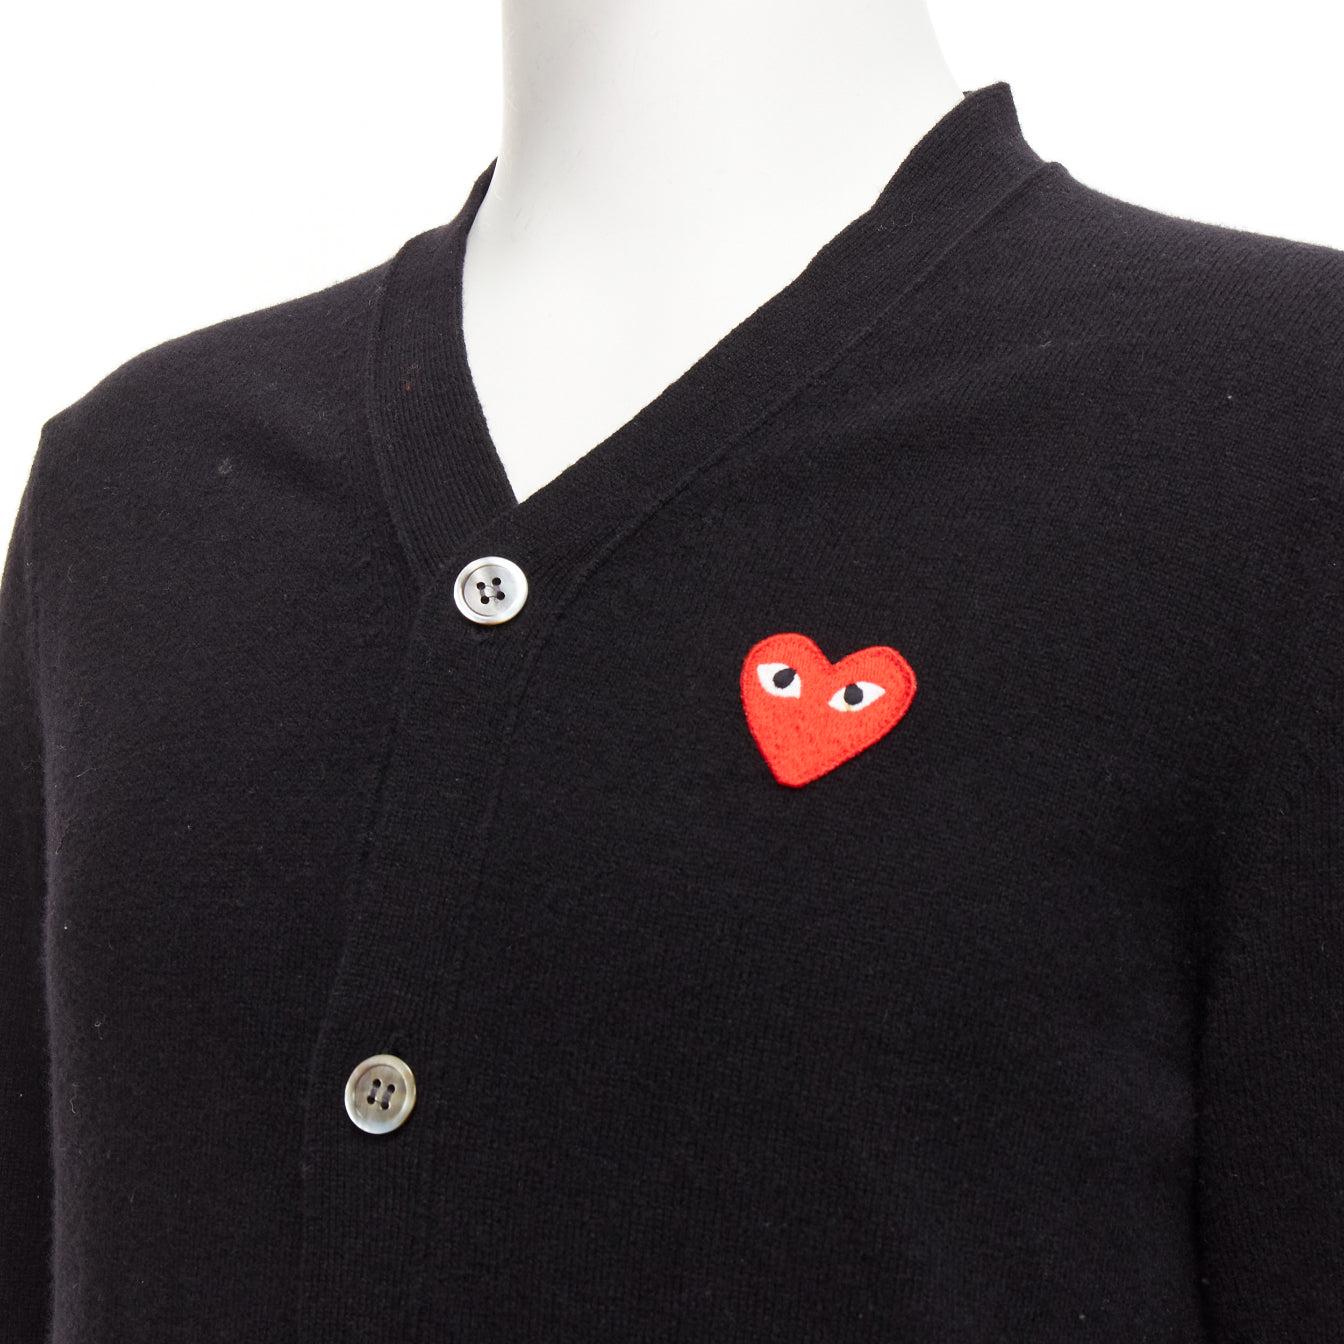 COMME DES GARCONS PLAY 2006 100% wool black heart logo cardigan M
Reference: MLCO/A00010
Brand: Comme Des Garcons
Collection: PLAY
Material: Wool
Color: Black, Red
Pattern: Cartoon
Closure: Button
Made in: Japan

CONDITION:
Condition: Good, this